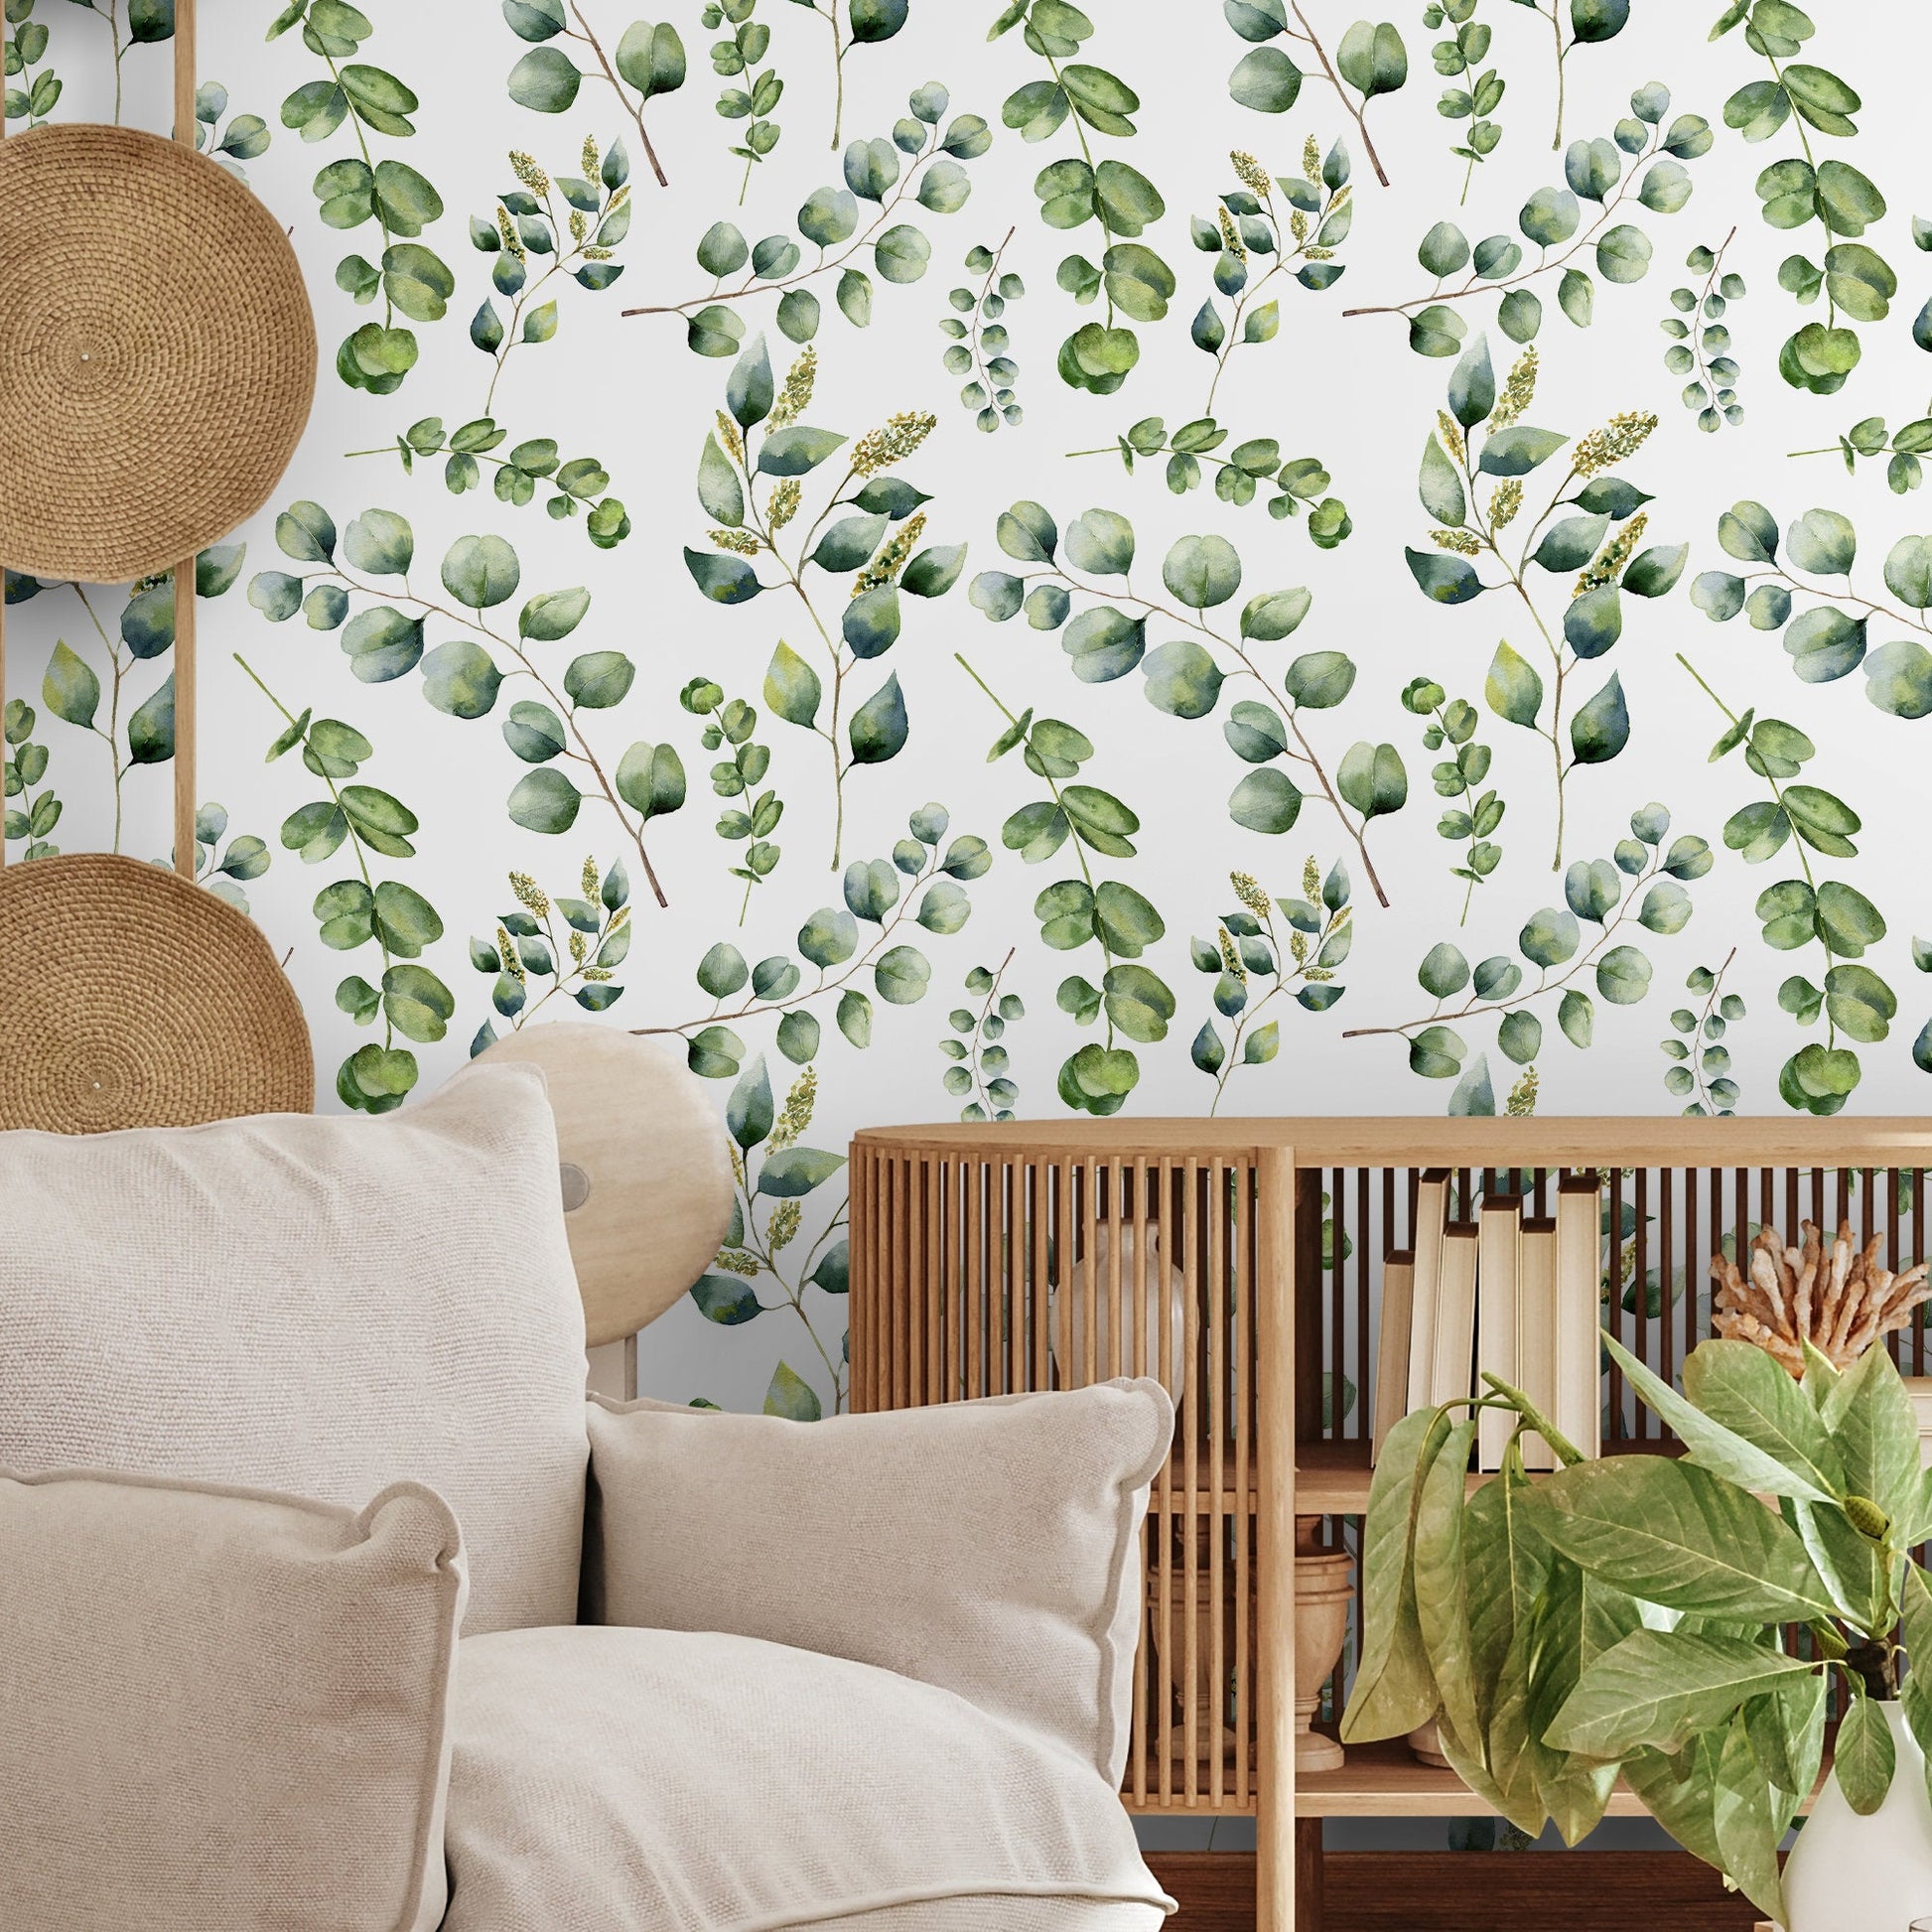 Eucalyptus Removable Wallpaper Temporary Wallpaper Foliage Self Adhesive Peel and Stick Wallpaper Minimalistic Leaves - A649